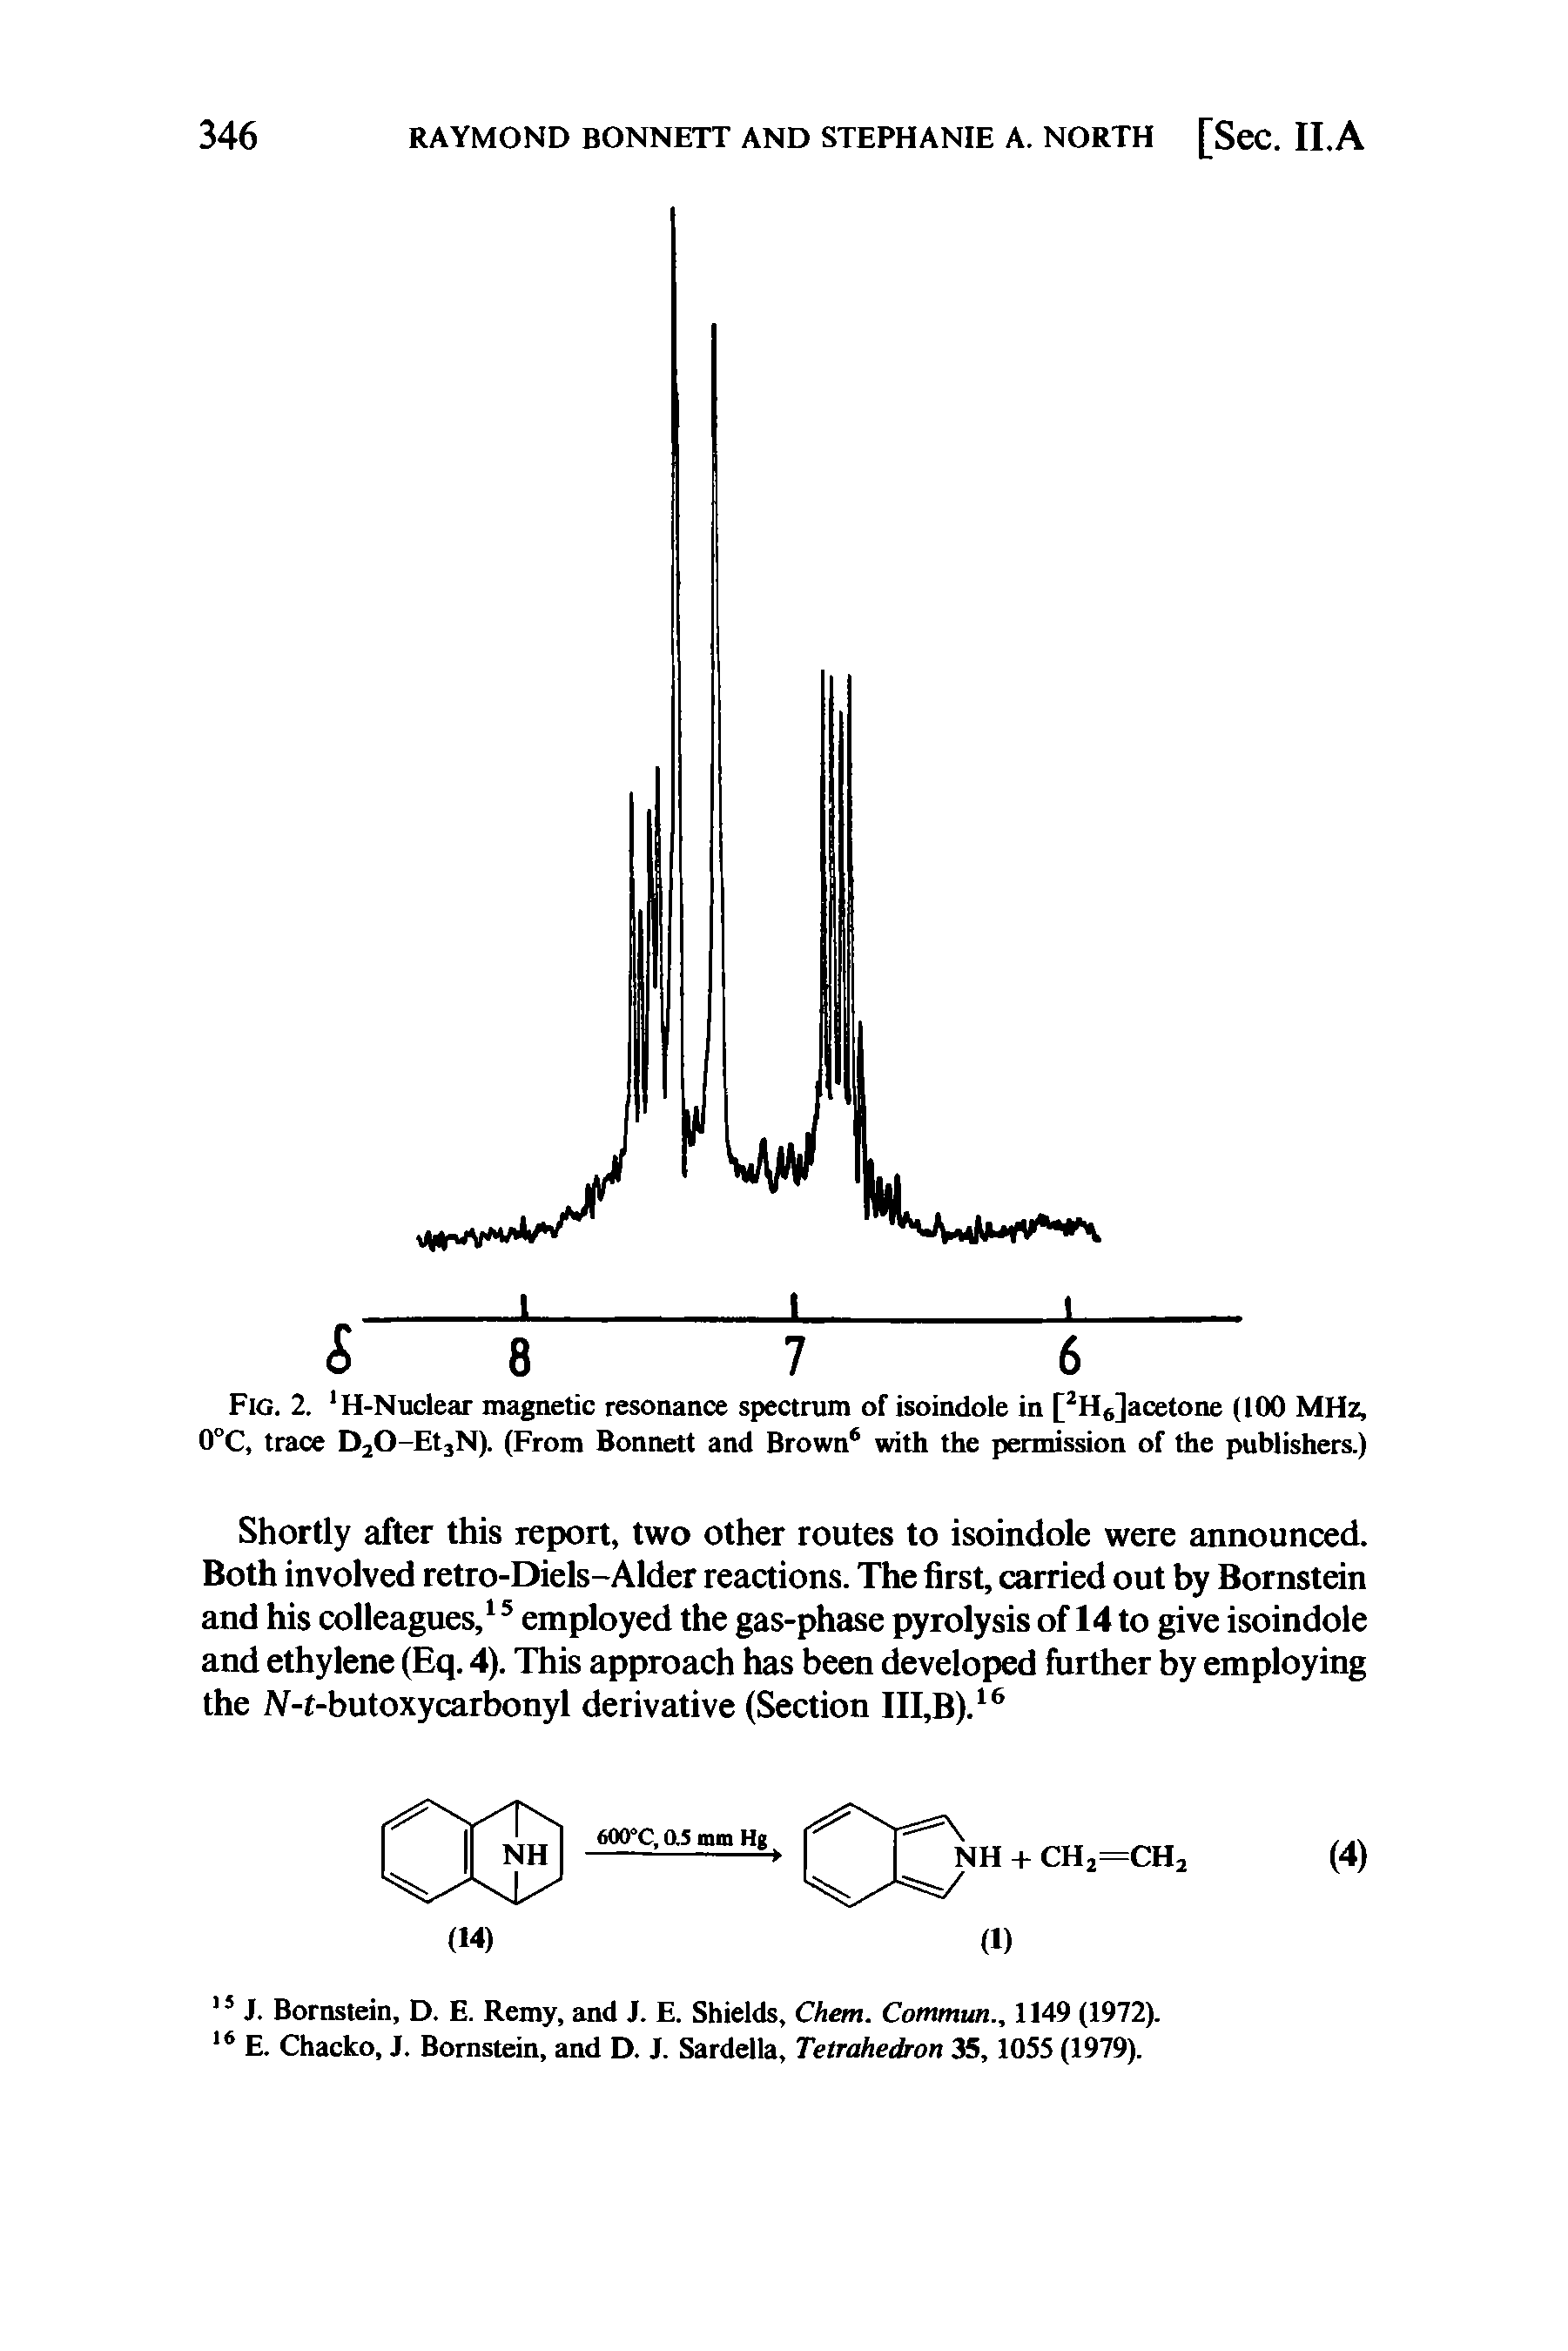 Fig. 2. H-Nuclear magnetic resonance spectrum of isoindole in [2H6]acetone (100 MHz, 0°C, trace D20-Et3N). (From Bonnett and Brown6 with the permission of the publishers.)...